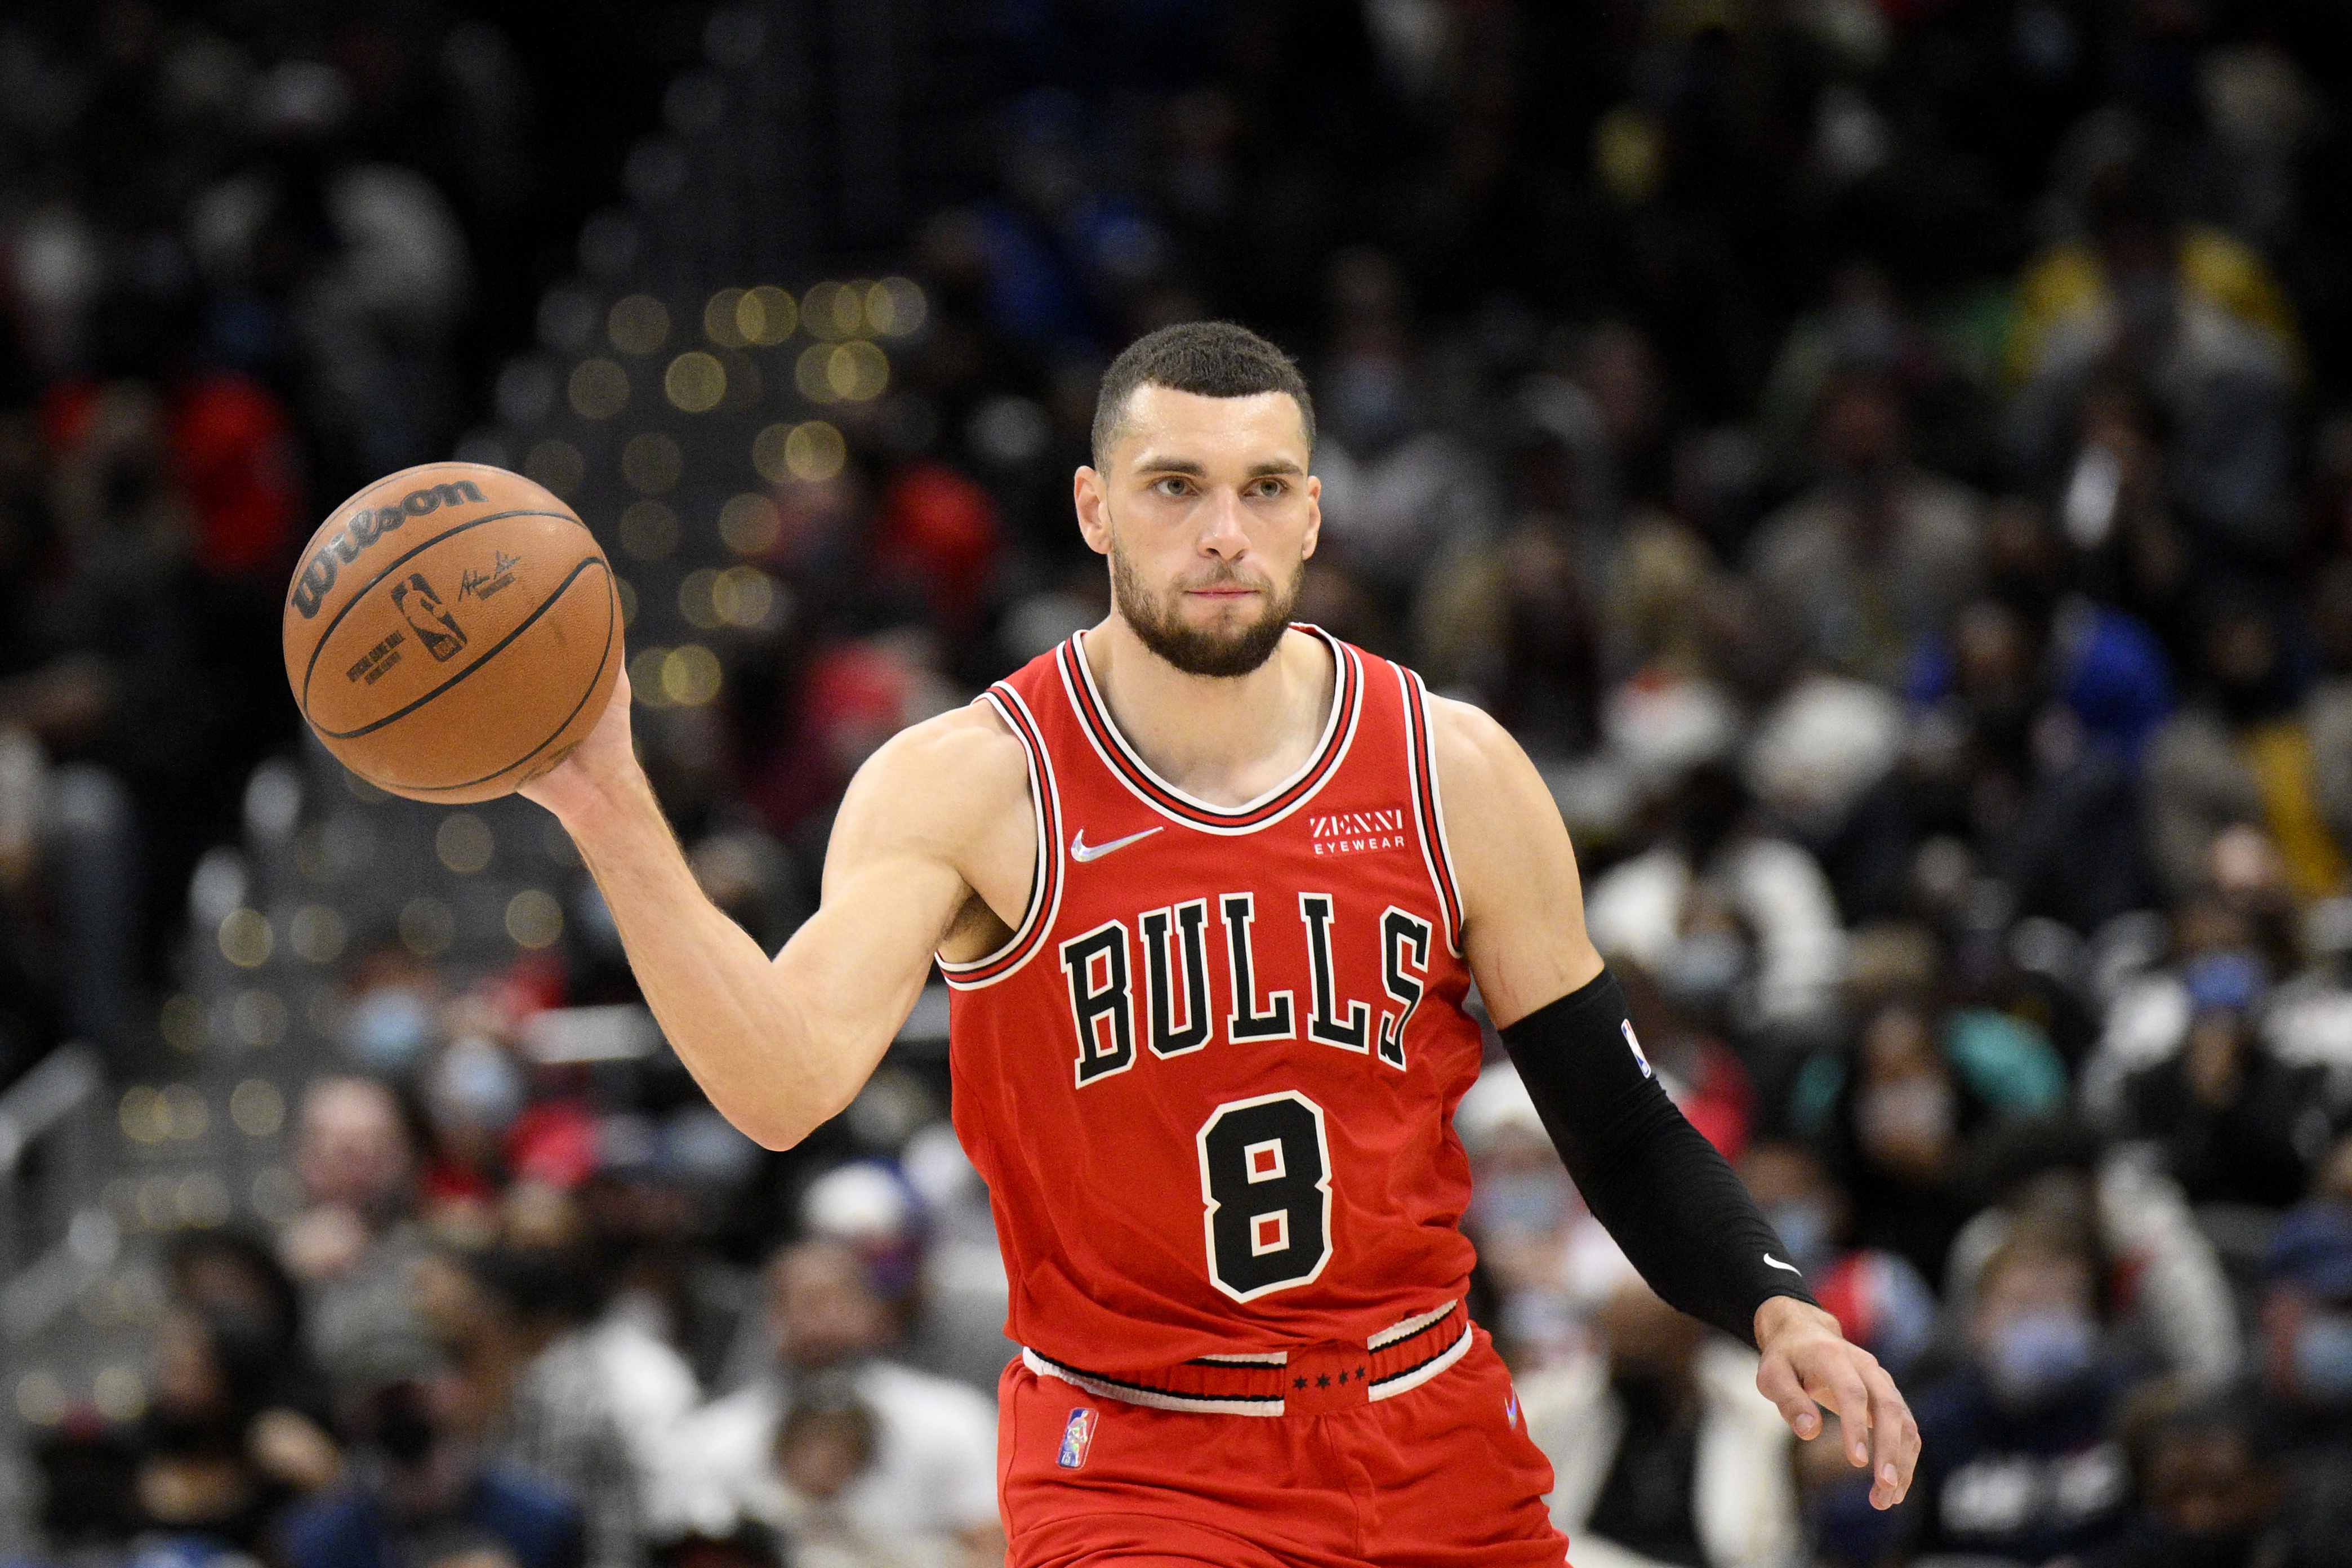 Bulls' Zach Lavine is "Not Expected To Miss Significant Time" After Knee Injury MRI thumbnail